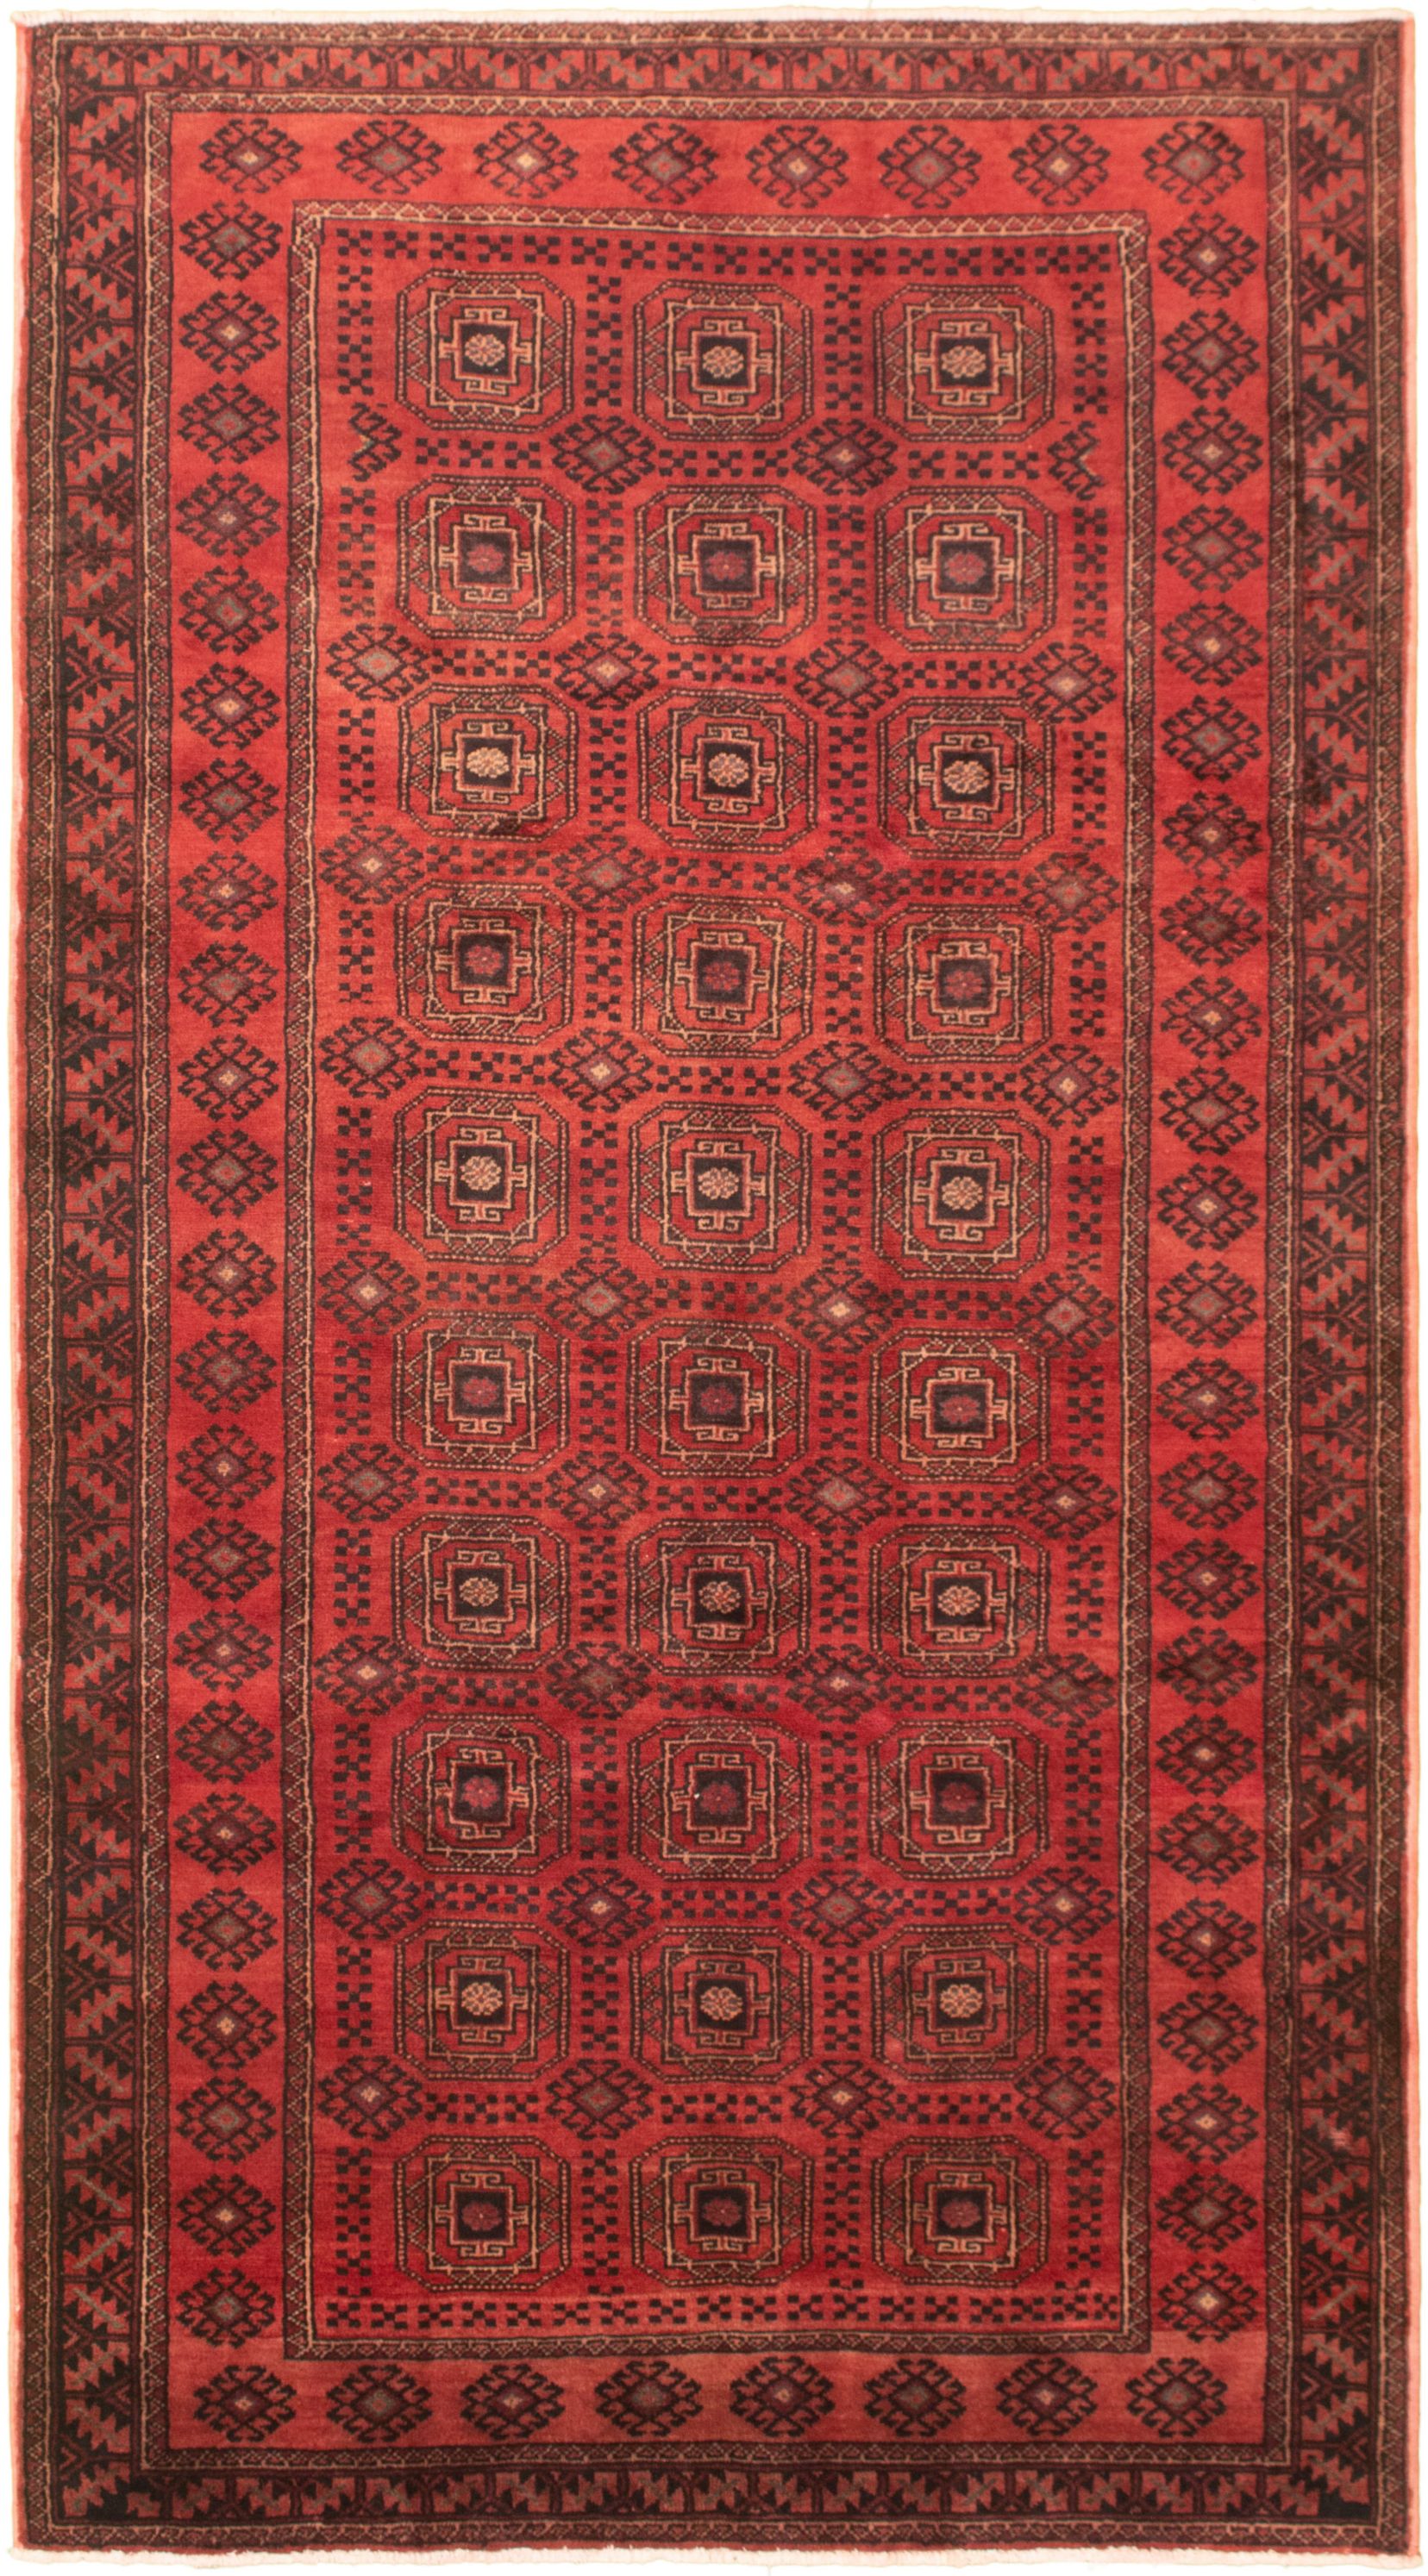 Hand-knotted Authentic Turkish Dark Red Wool Rug 5'3" x 9'10"  Size: 5'3" x 9'10"  